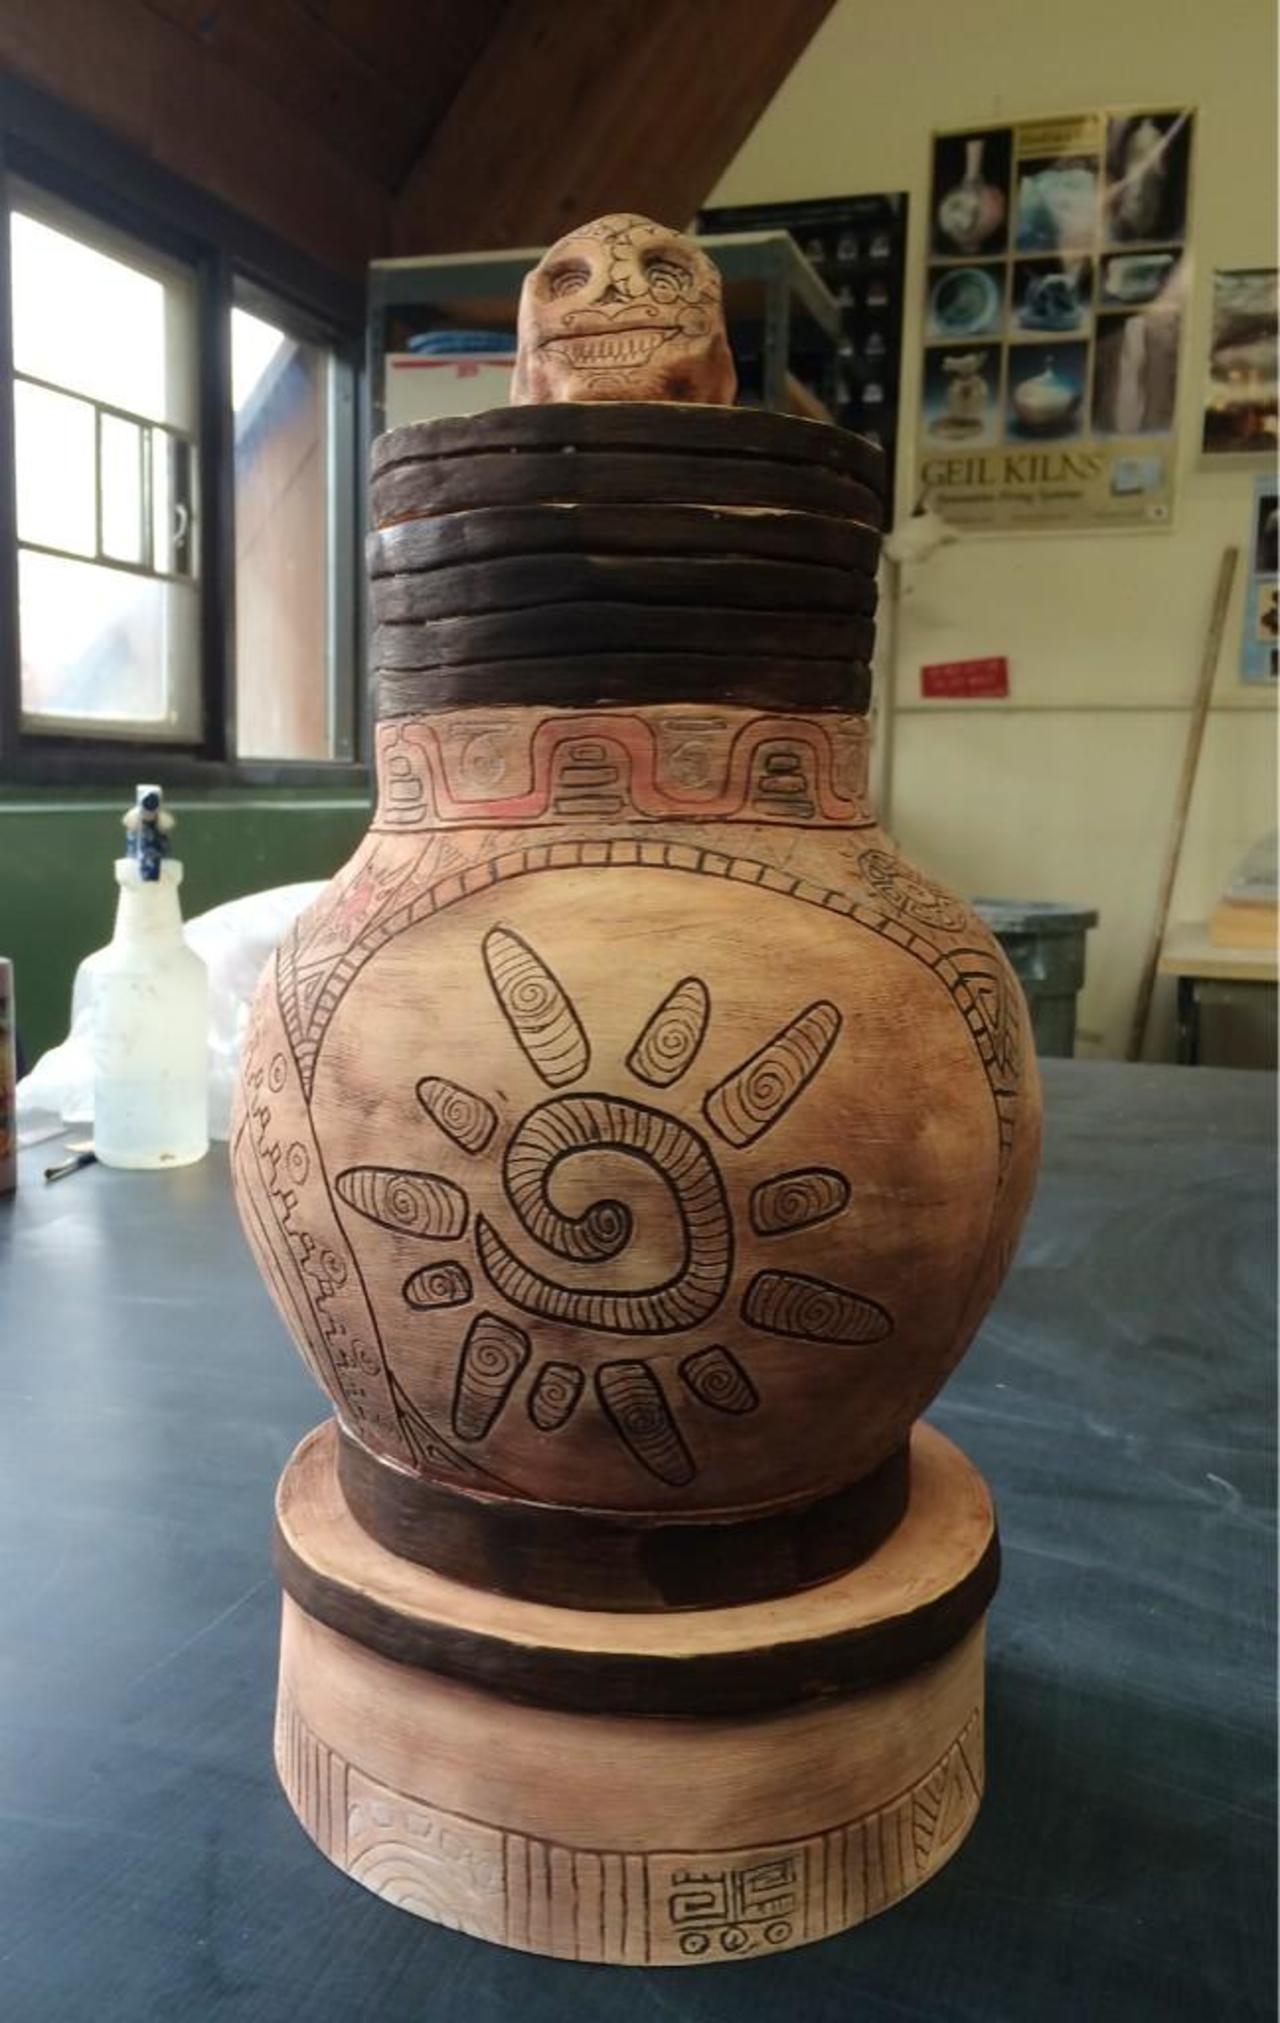 My finished urn! ❤️ #ceramics #pottery #art http://t.co/fUECR8QELn